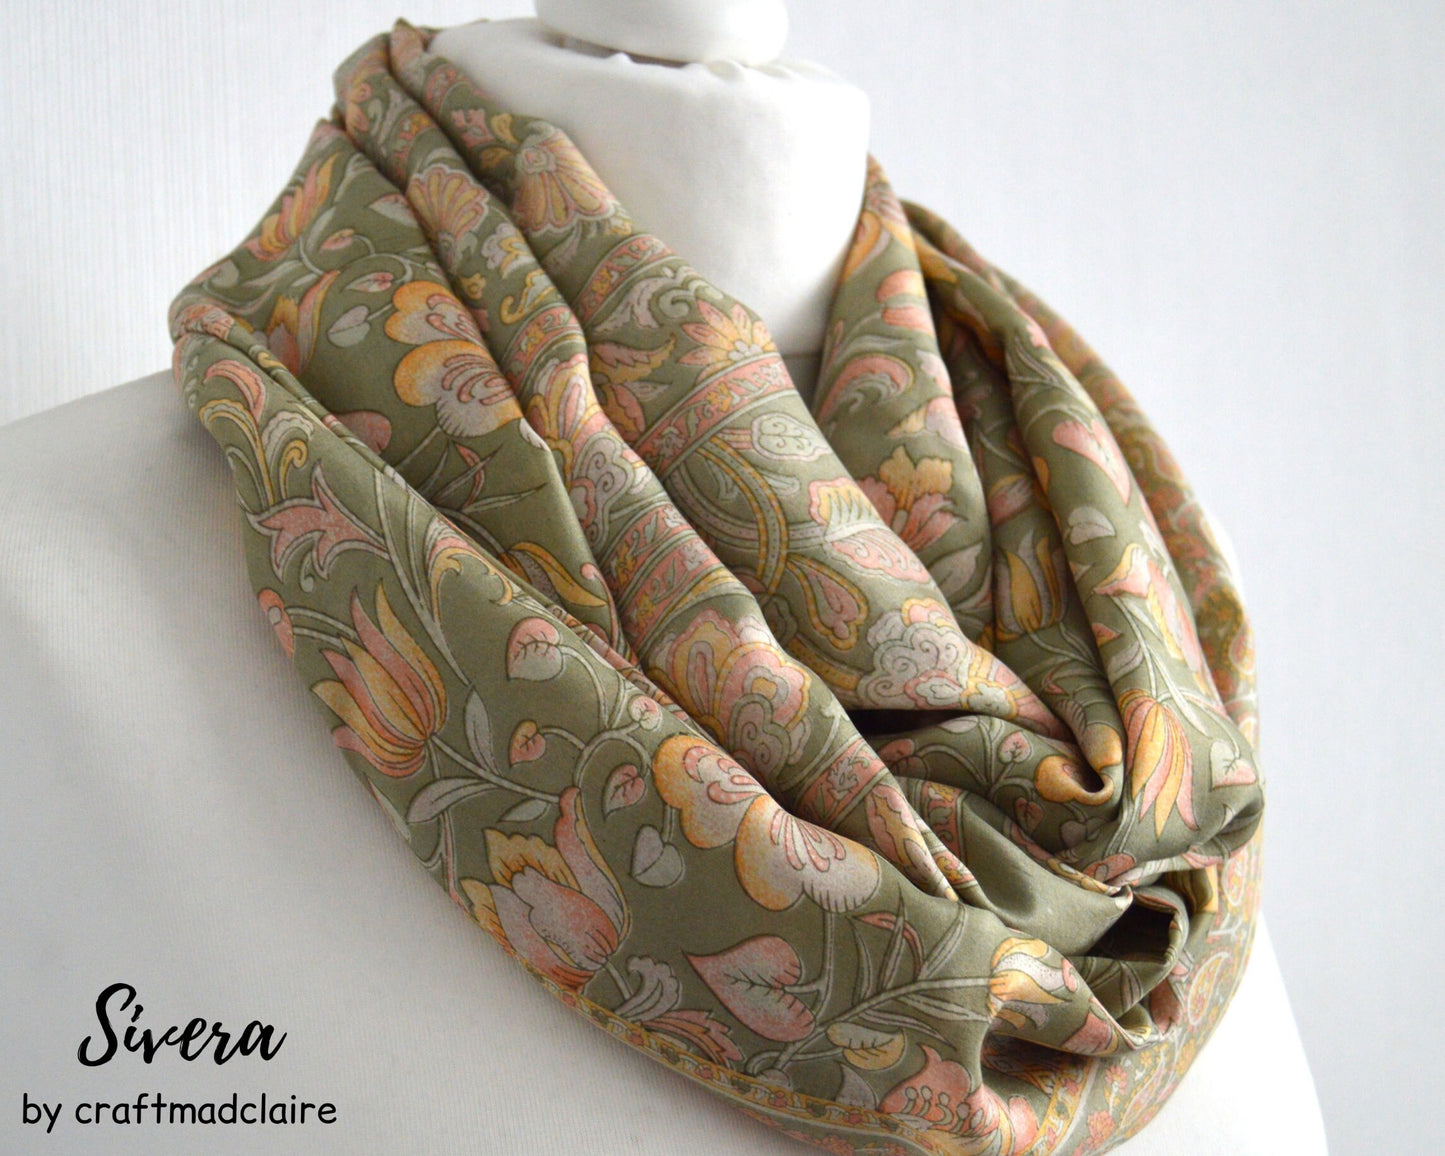 Sage Green Peach Floral Upcycled Vintage Sari Silk Scarf, Eco-Friendly Sophisticated Bohemian Scarf, Unique Teacher Gift Mum Mom Sister gift